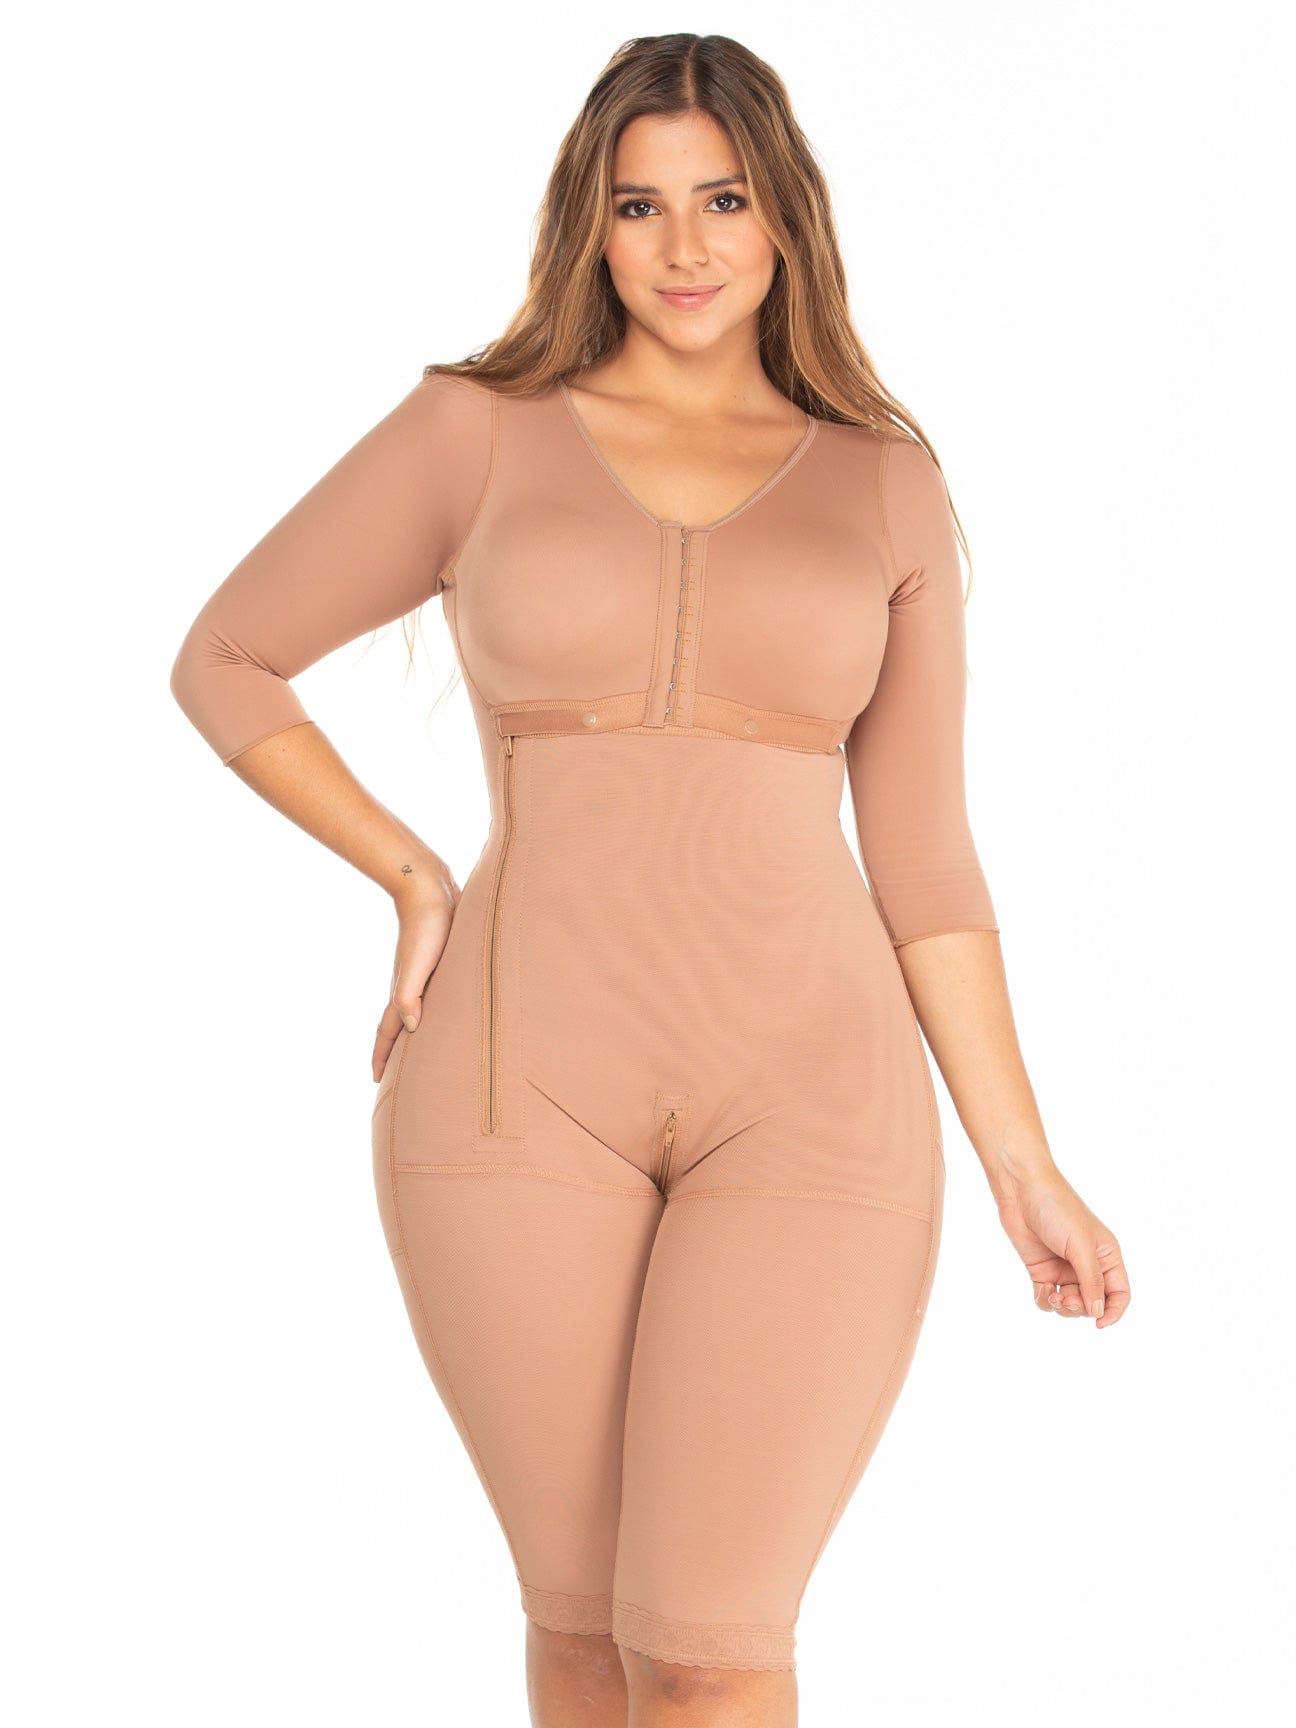 Full front view of a model wearing the full body faja with high compression.